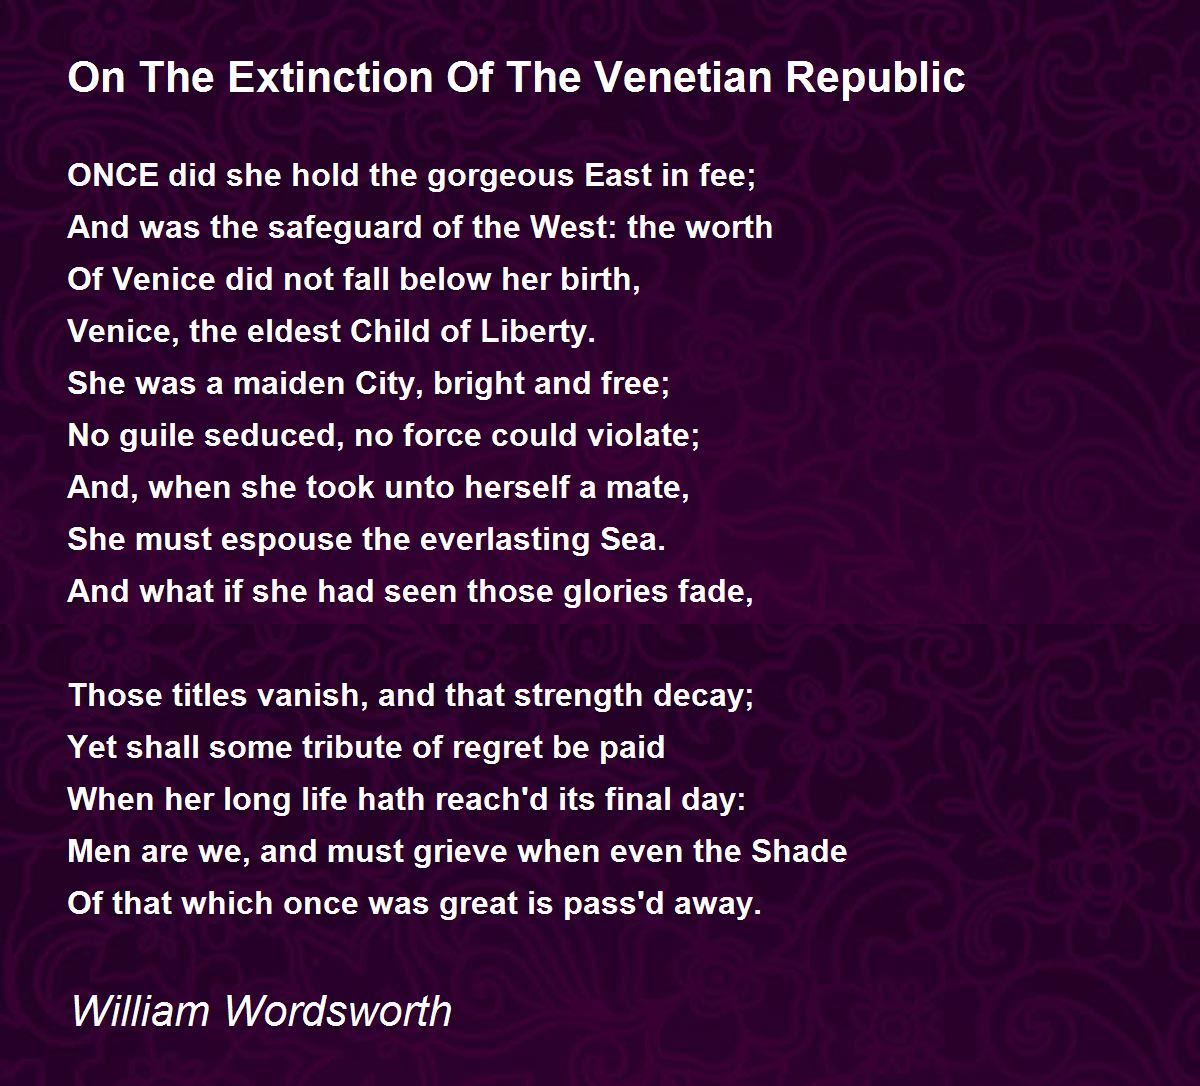 On The Extinction Of The Venetian Republic Poem by William 